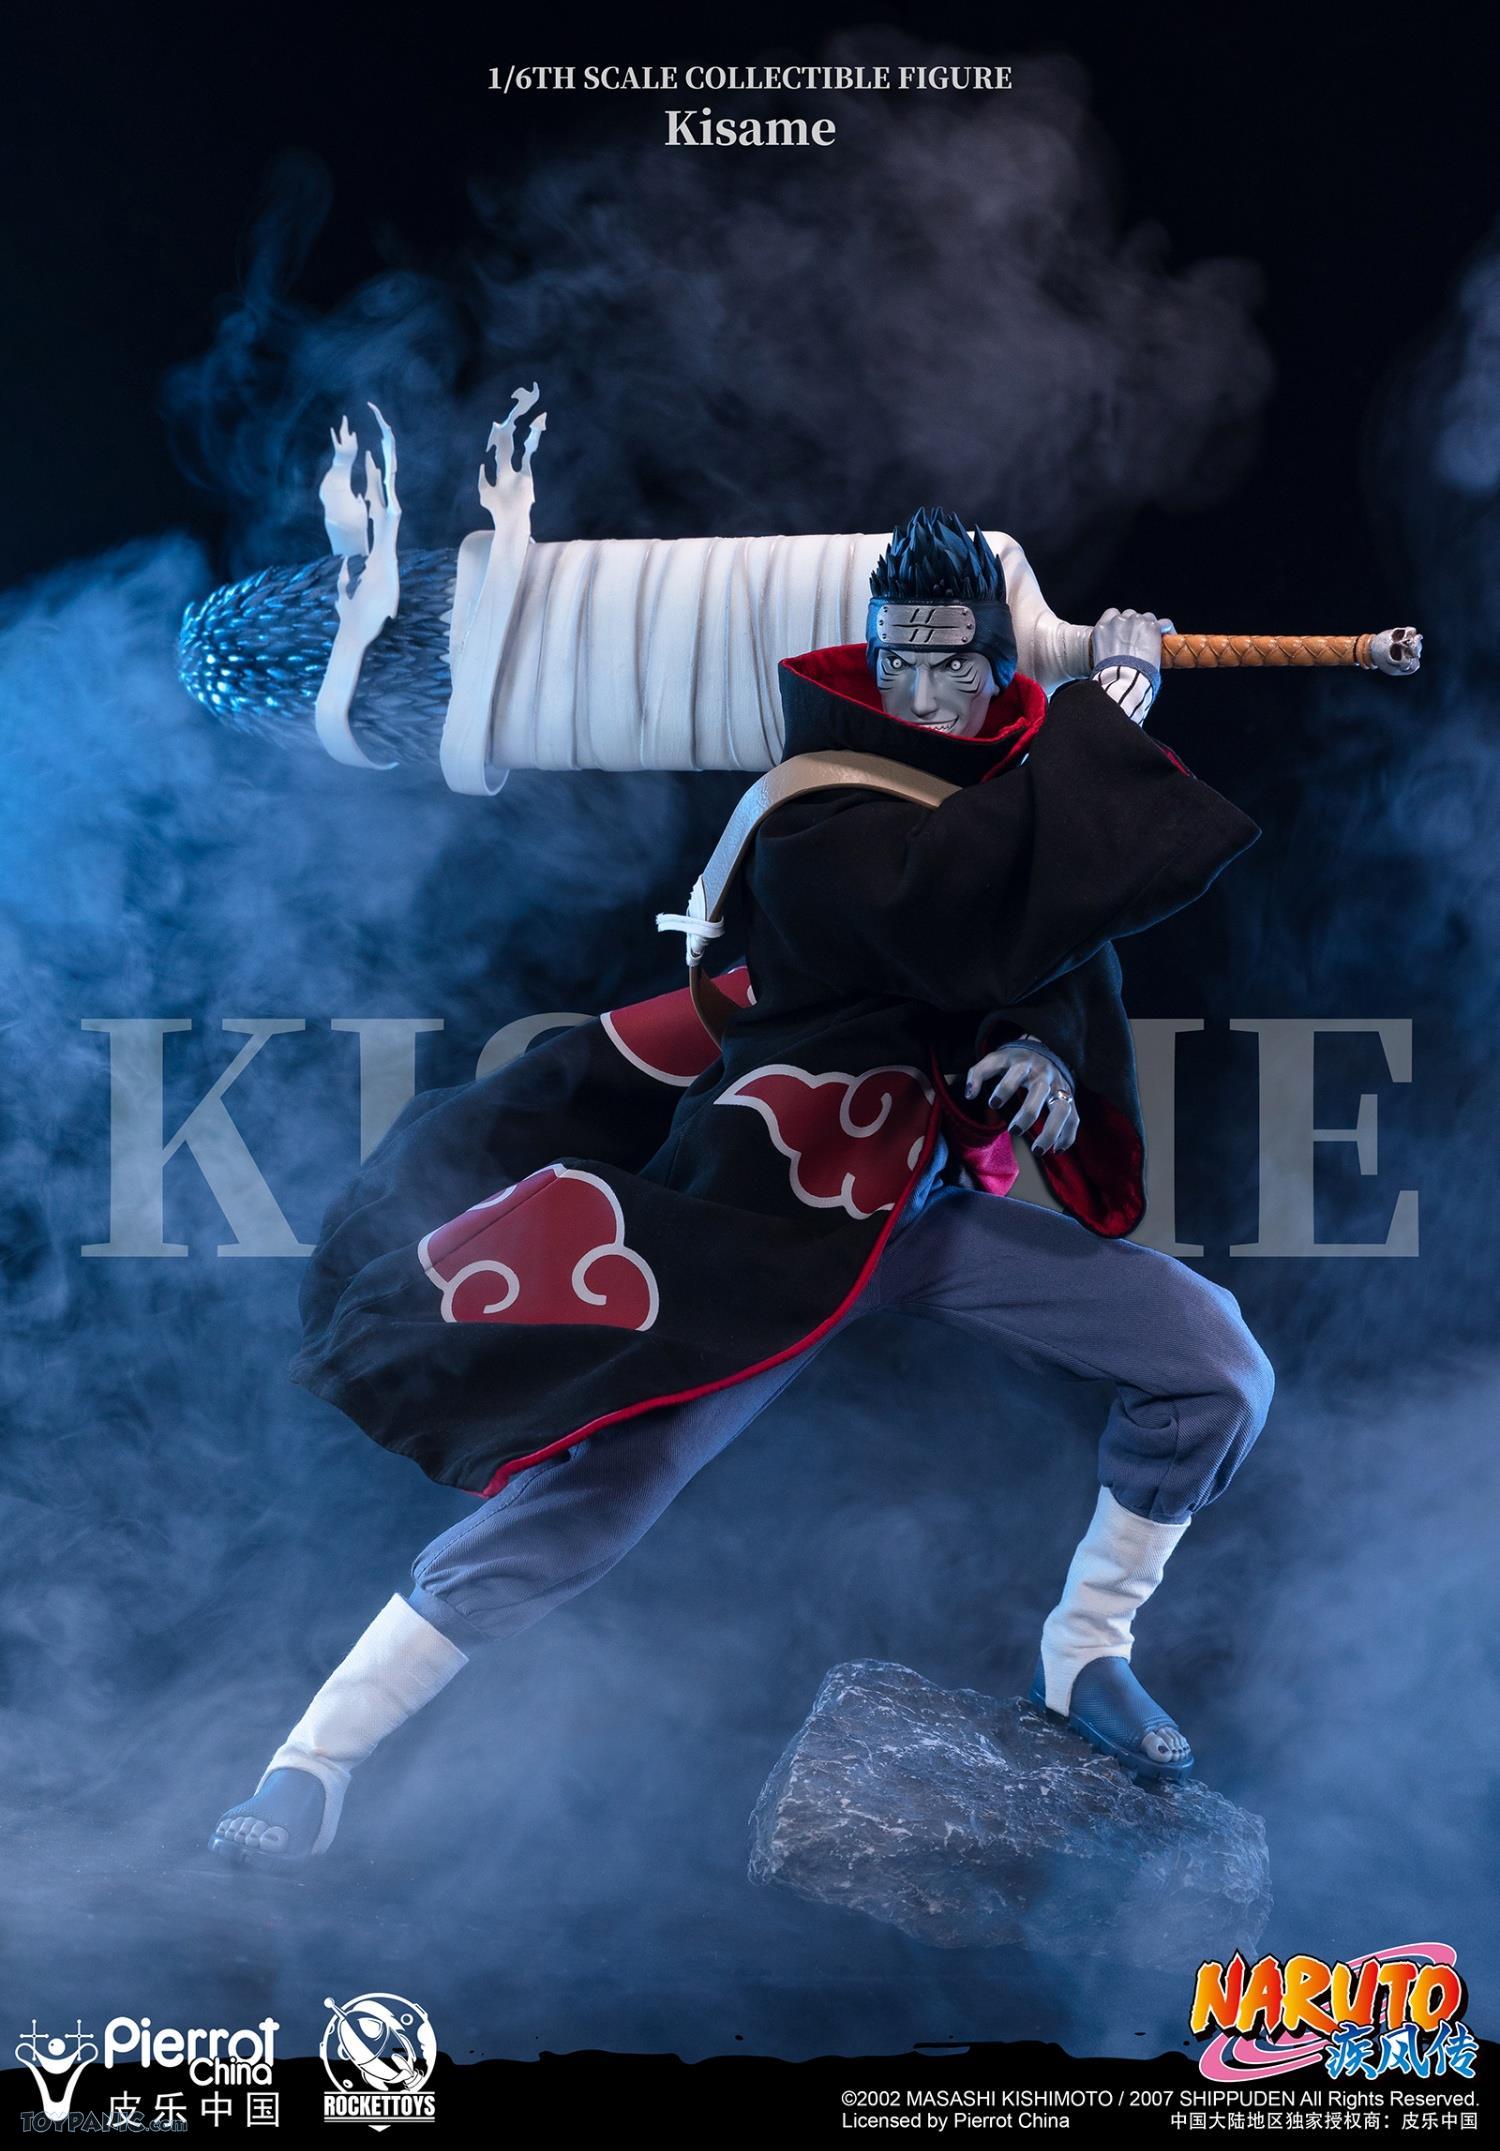 NEW PRODUCT: Rocket Toys ROC-007 1/6 Scale Kisame 221202460434PM_6591732